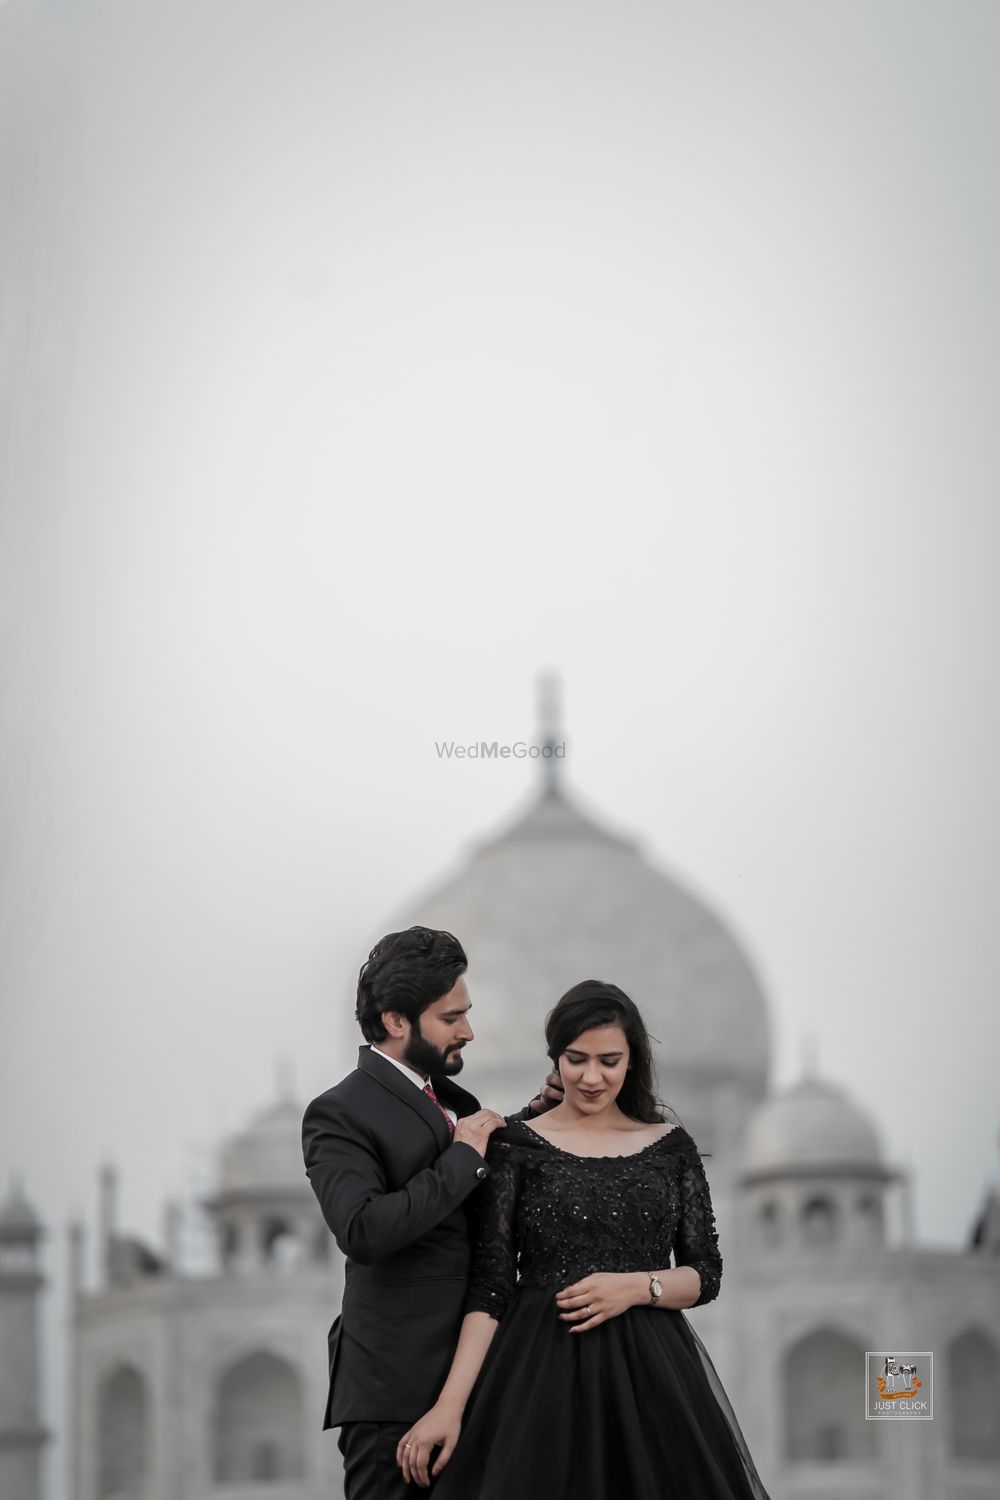 Photo From Mudit + Anjali - By Just Click photography